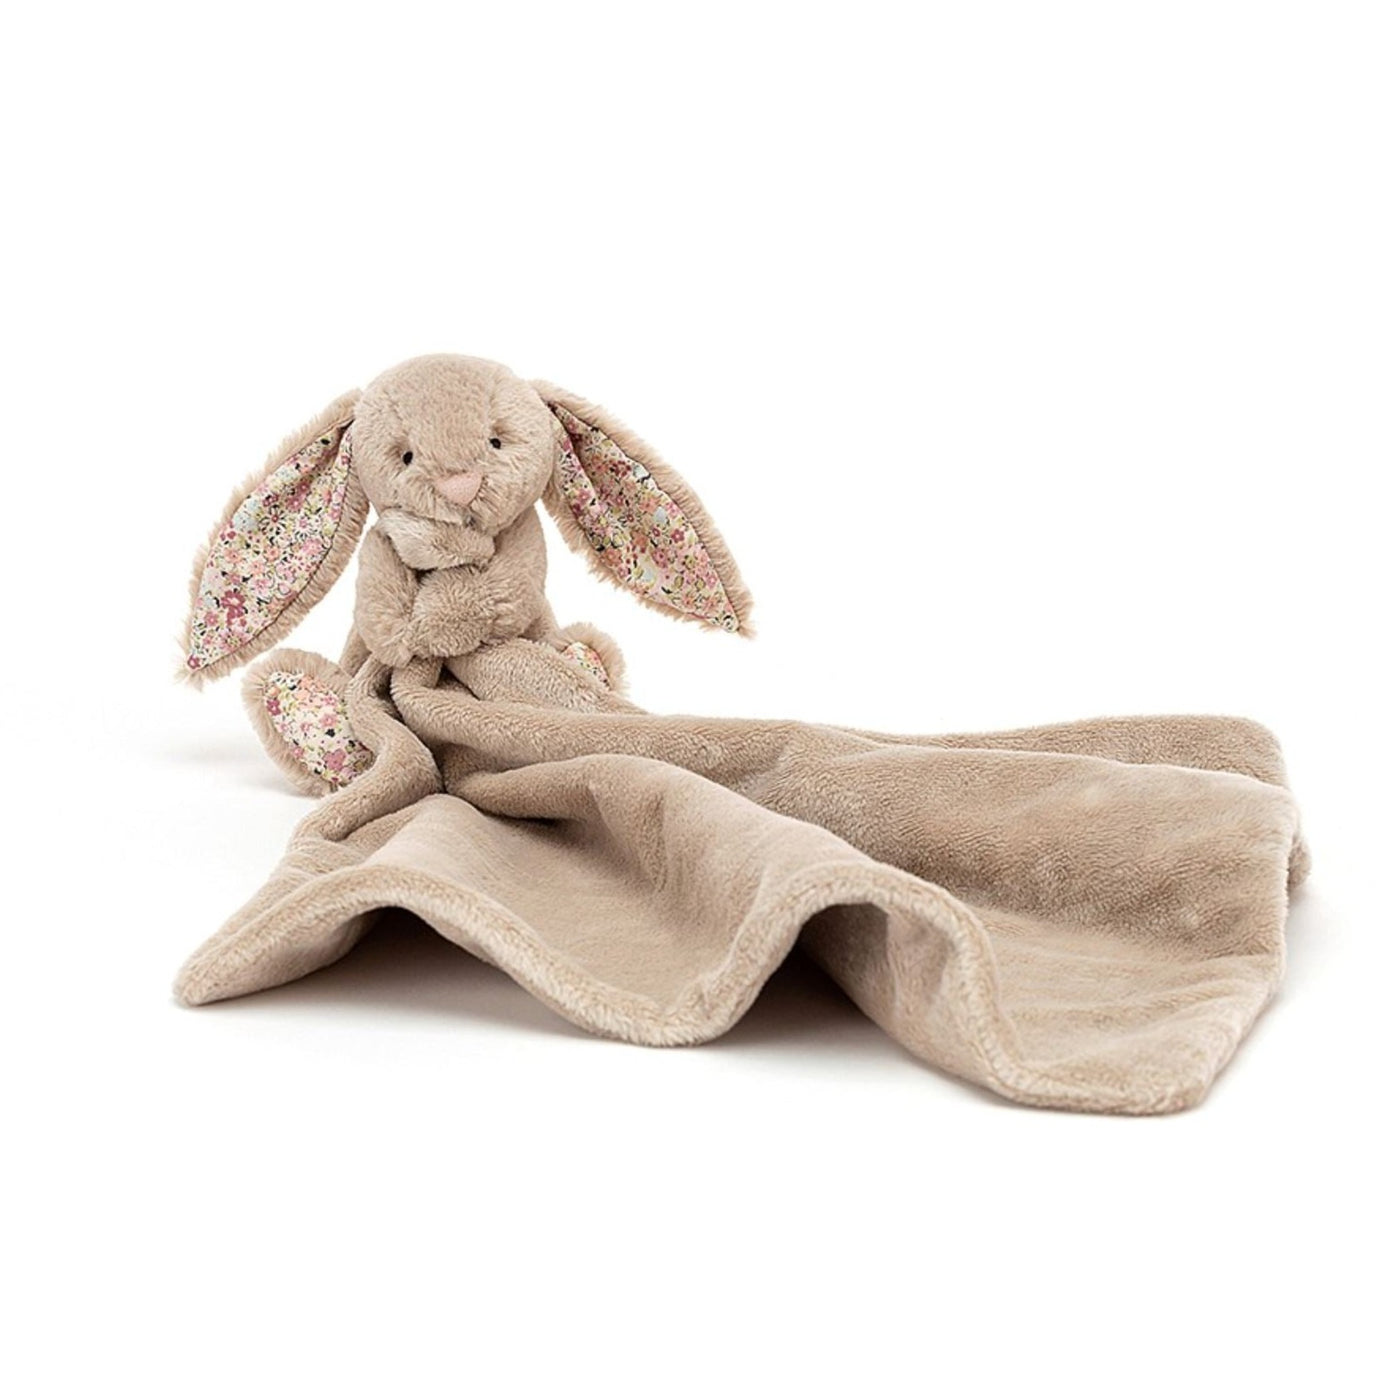 Bashful Blossom Bea Beige Bunny Soother Soother Jellycat Australia